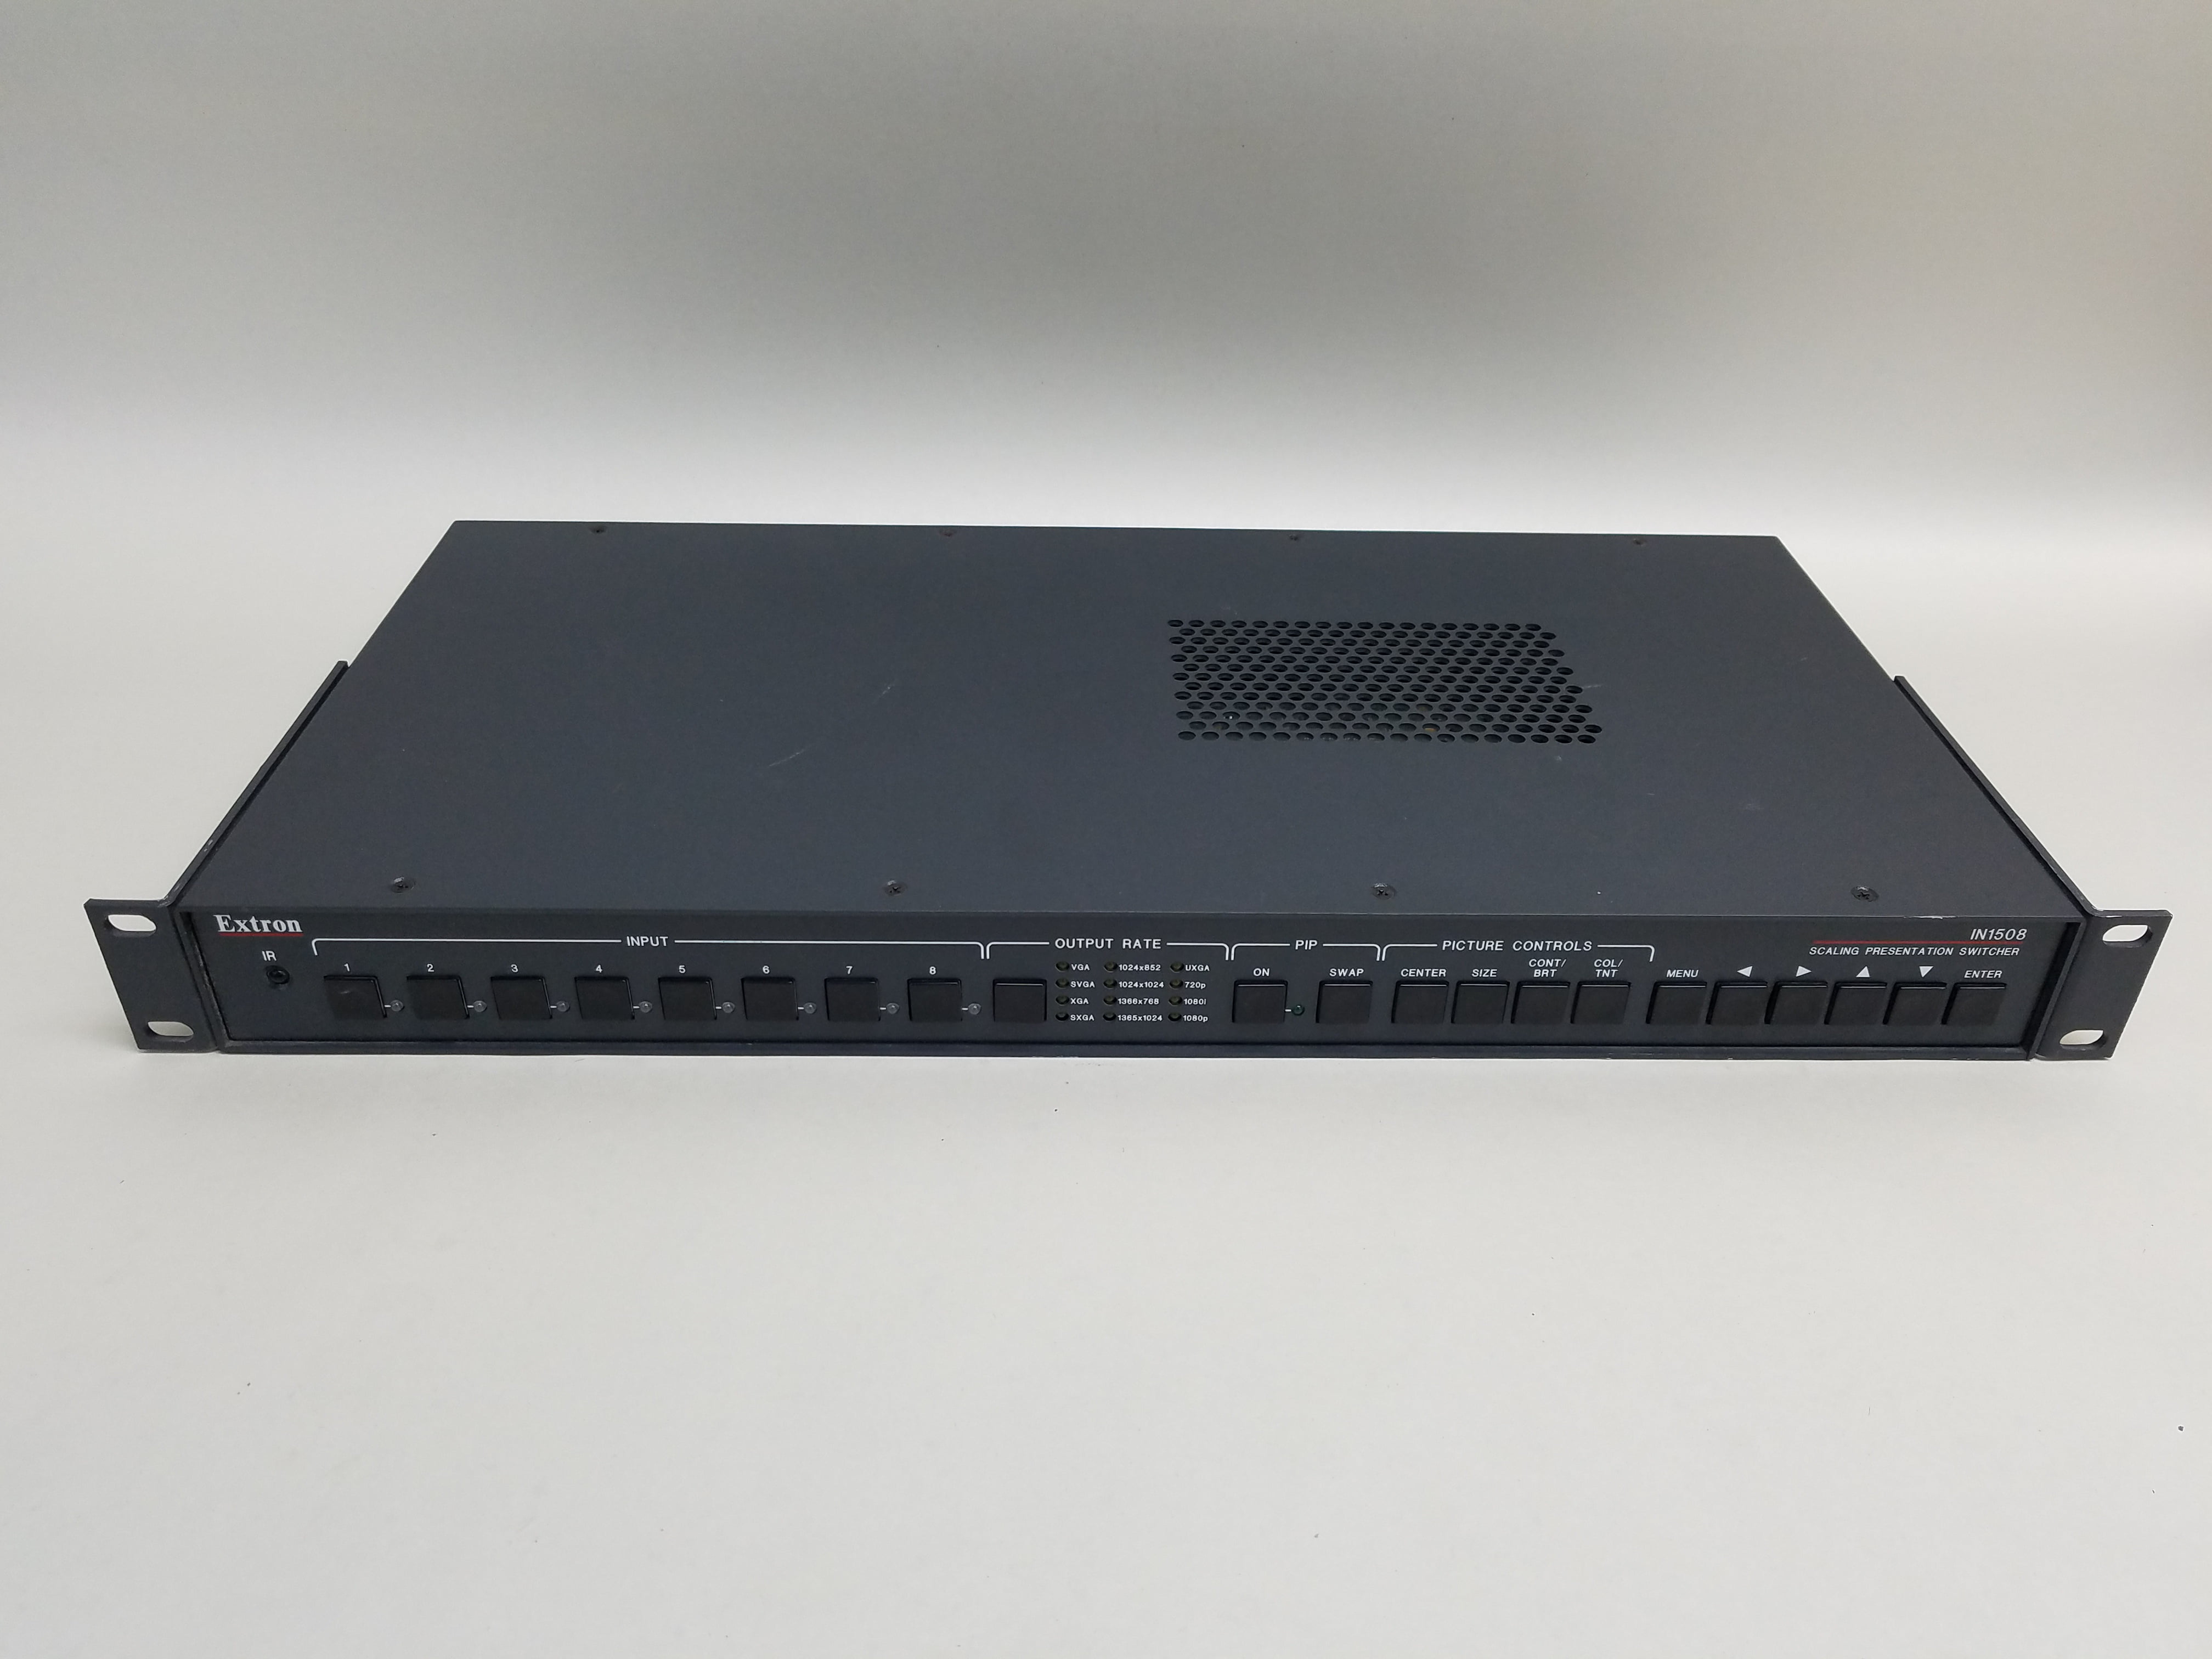 Extron IN1508 Eight Input Scaling Presentation Switcher with PIP 